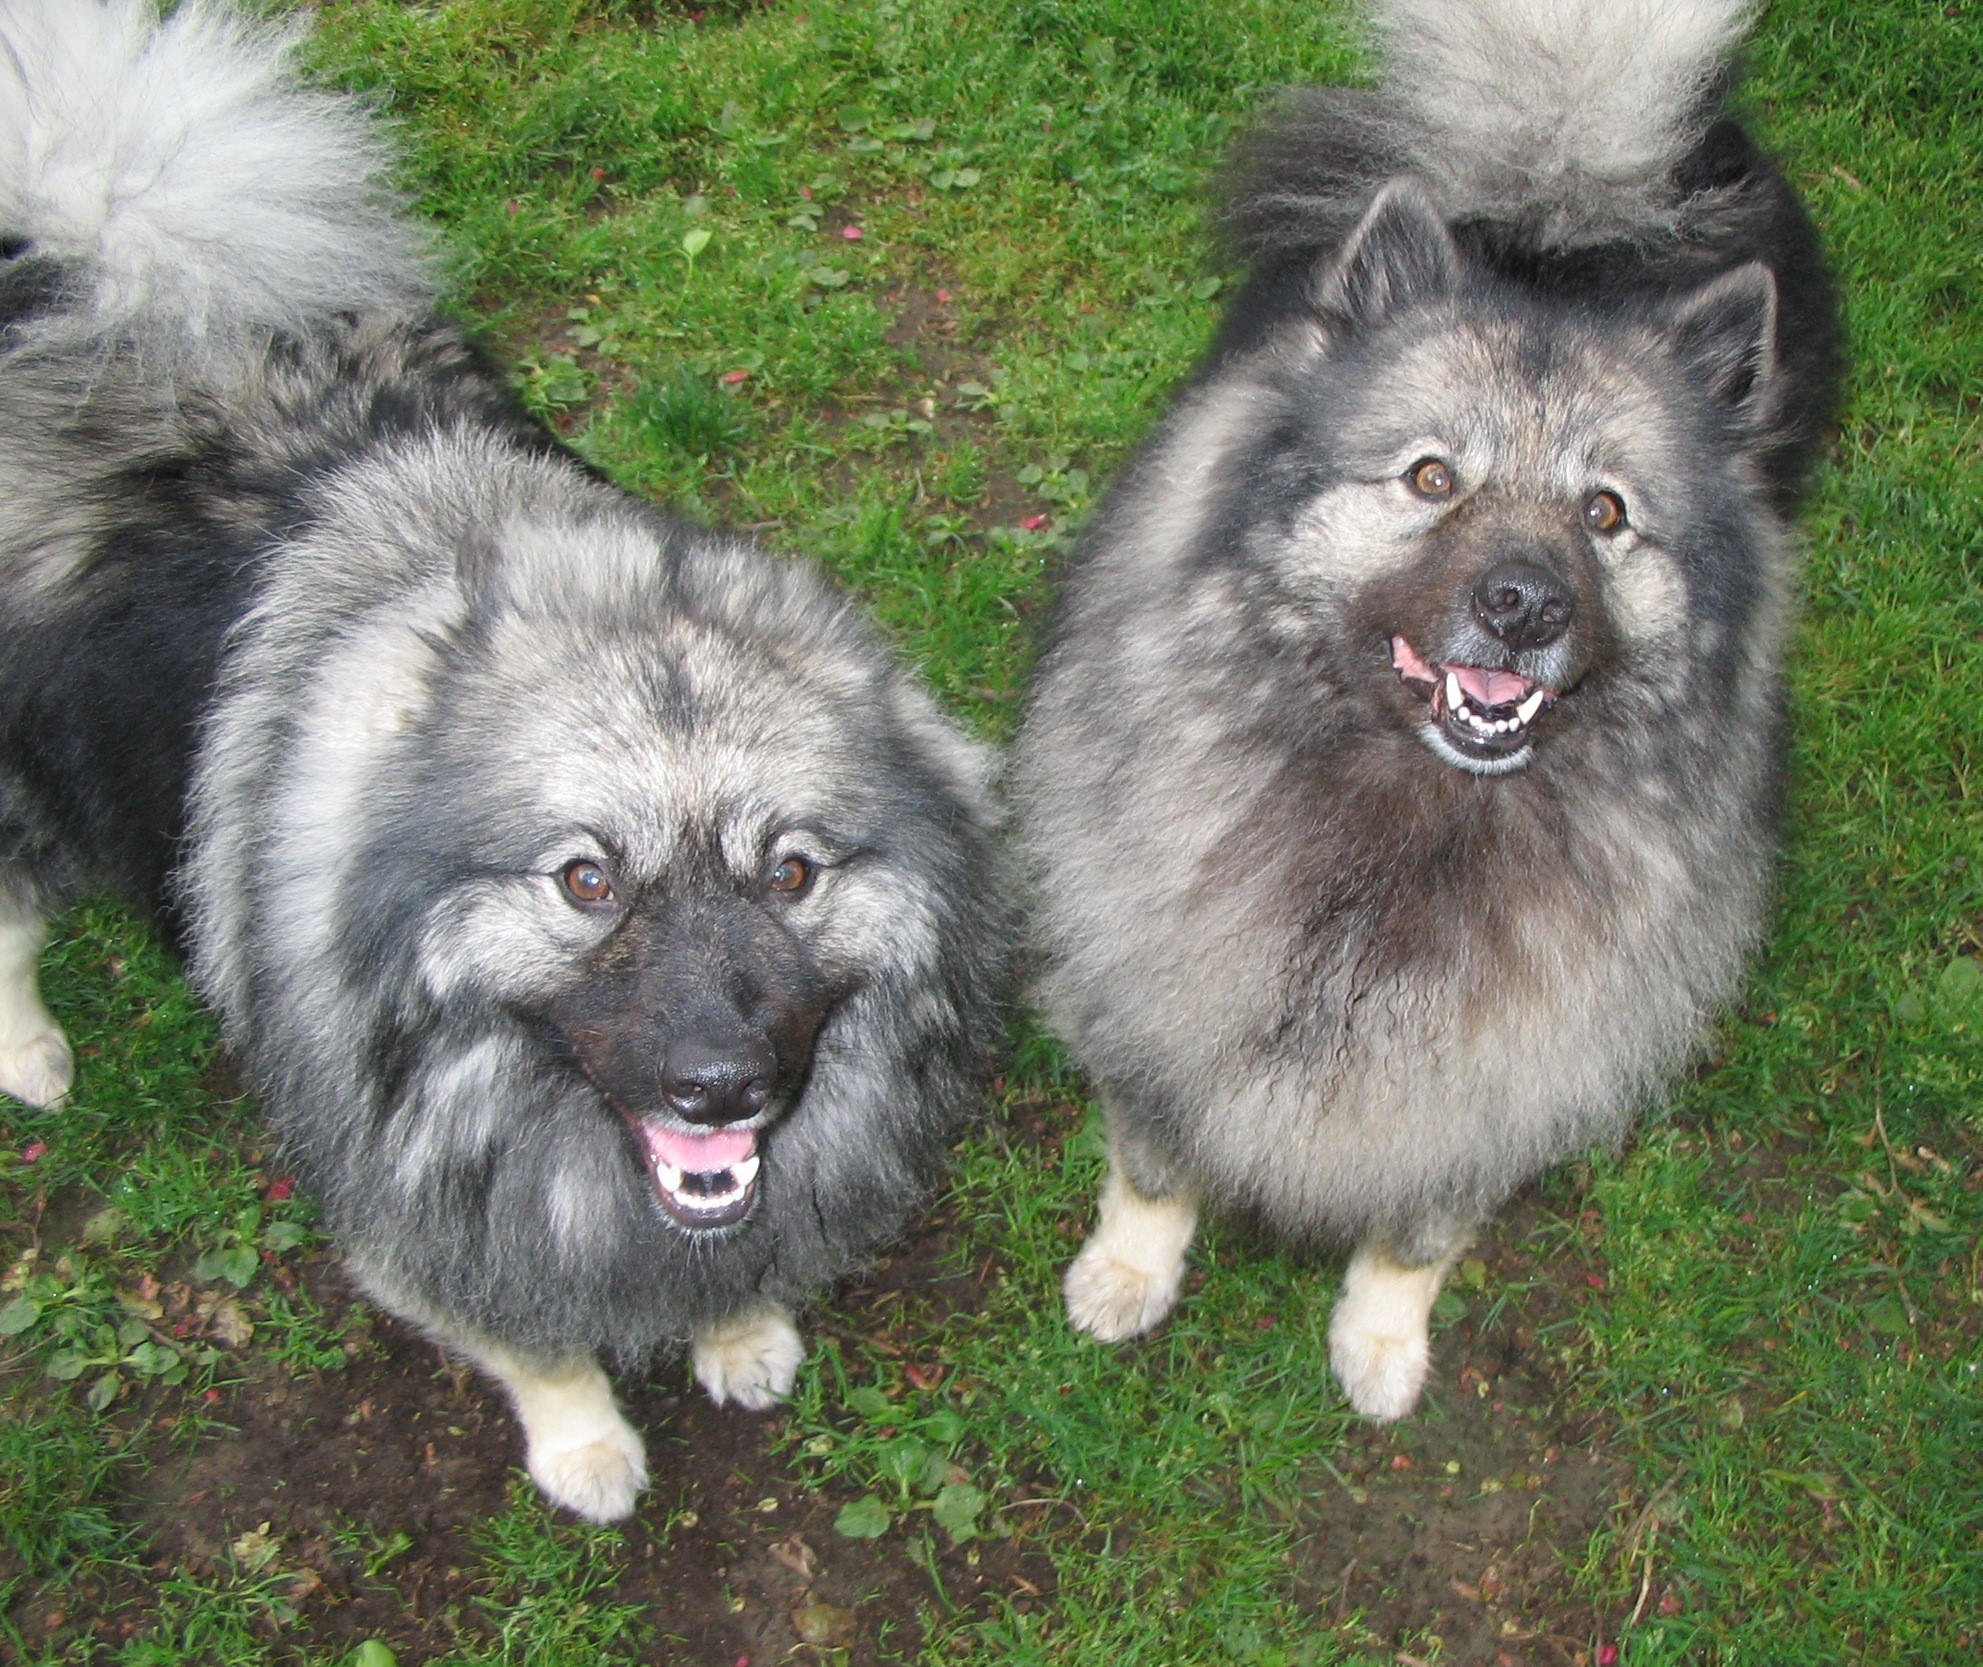 Pets For Adoption At Seacoast Keeshond Rescue In Essex Ma Petfinder